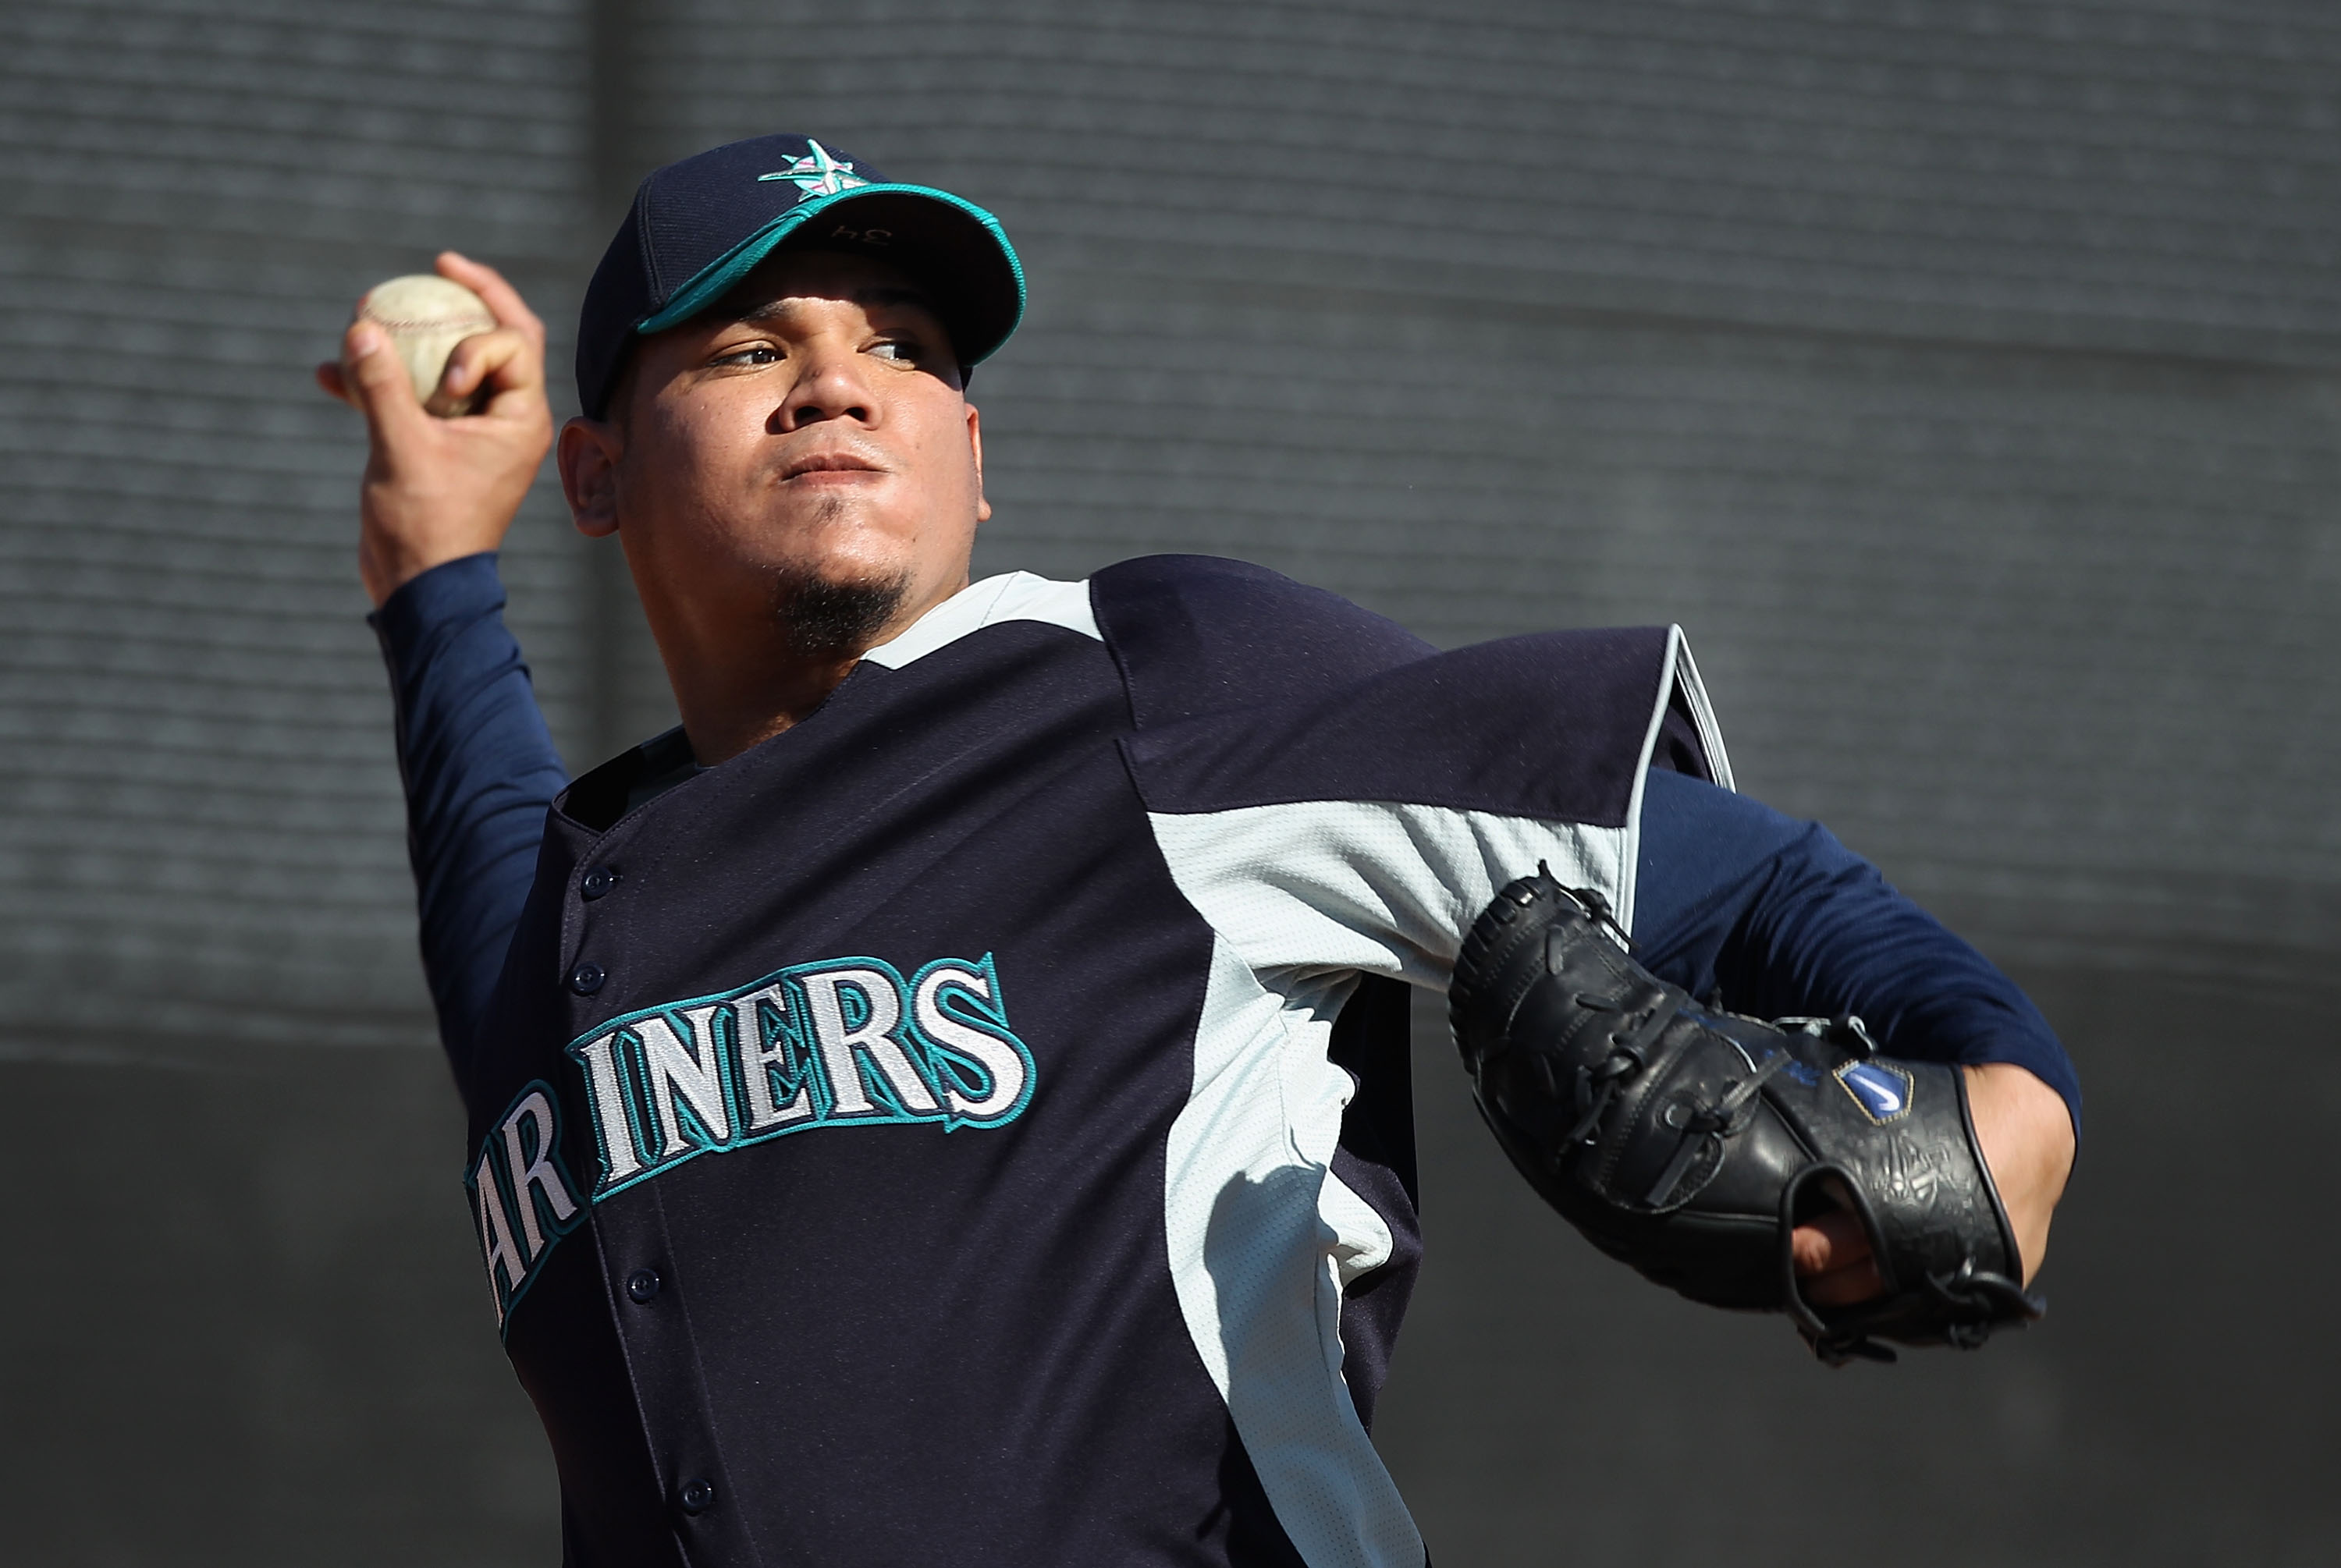 PEORIA, AZ - FEBRUARY 15:  Pitcher Felix Hernandez #34 of the Seattle Mariners throws during a MLB spring training practice at Peoria Stadium on February 15, 2011 in Peoria, Arizona.  (Photo by Christian Petersen/Getty Images)